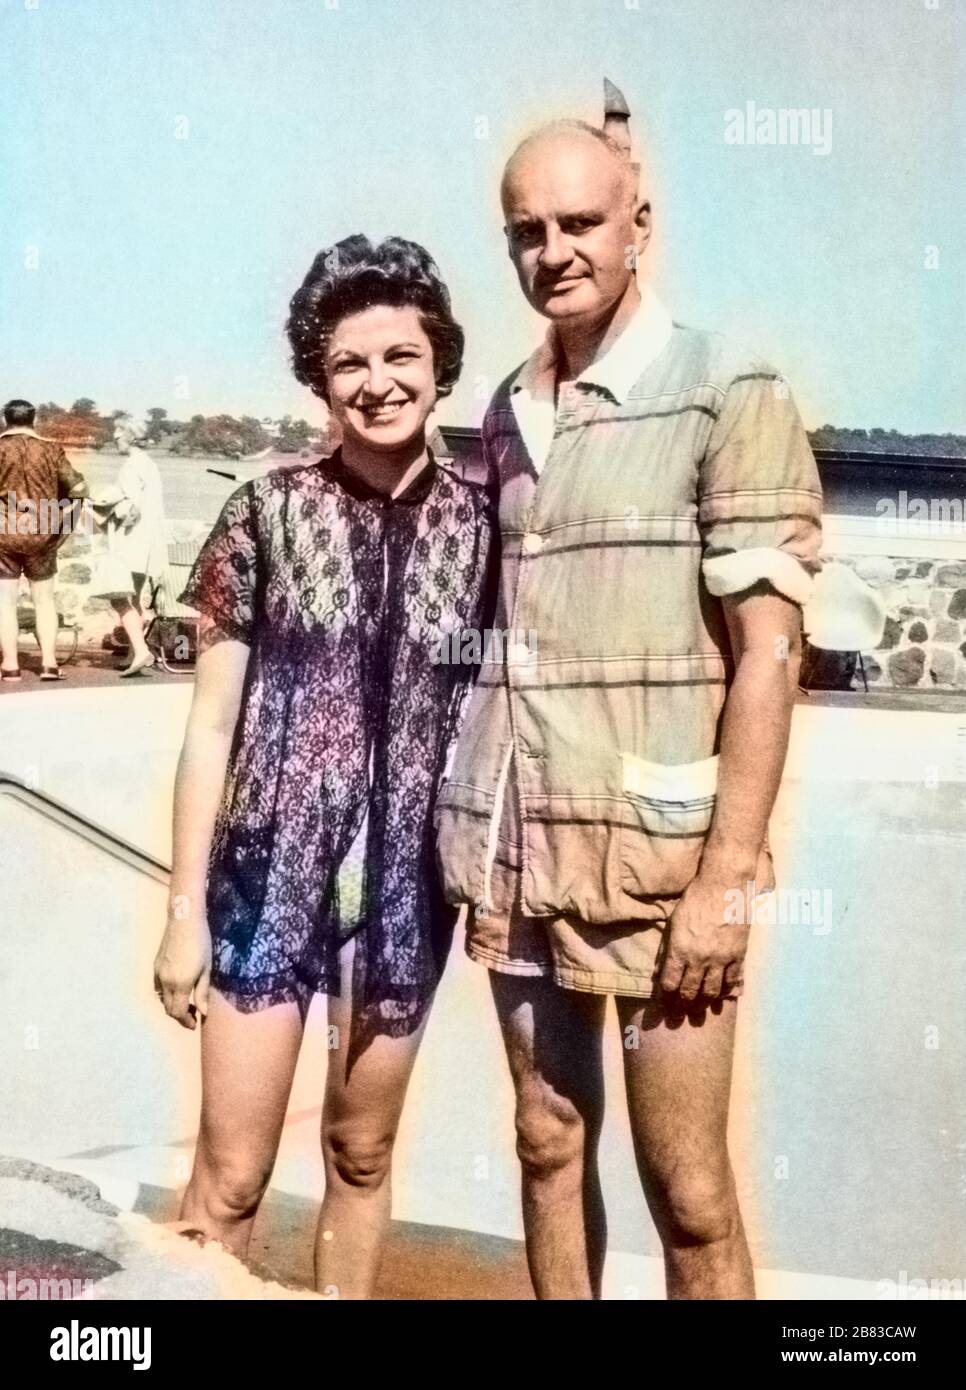 Mature American tourist couple posing in front of a swimming pool, with woman wearing a bathing suit and cover-up and man wearing shorts and a shirt, 1970. Note: Image has been digitally colorized using a modern process. Colors may not be period-accurate. () Stock Photo